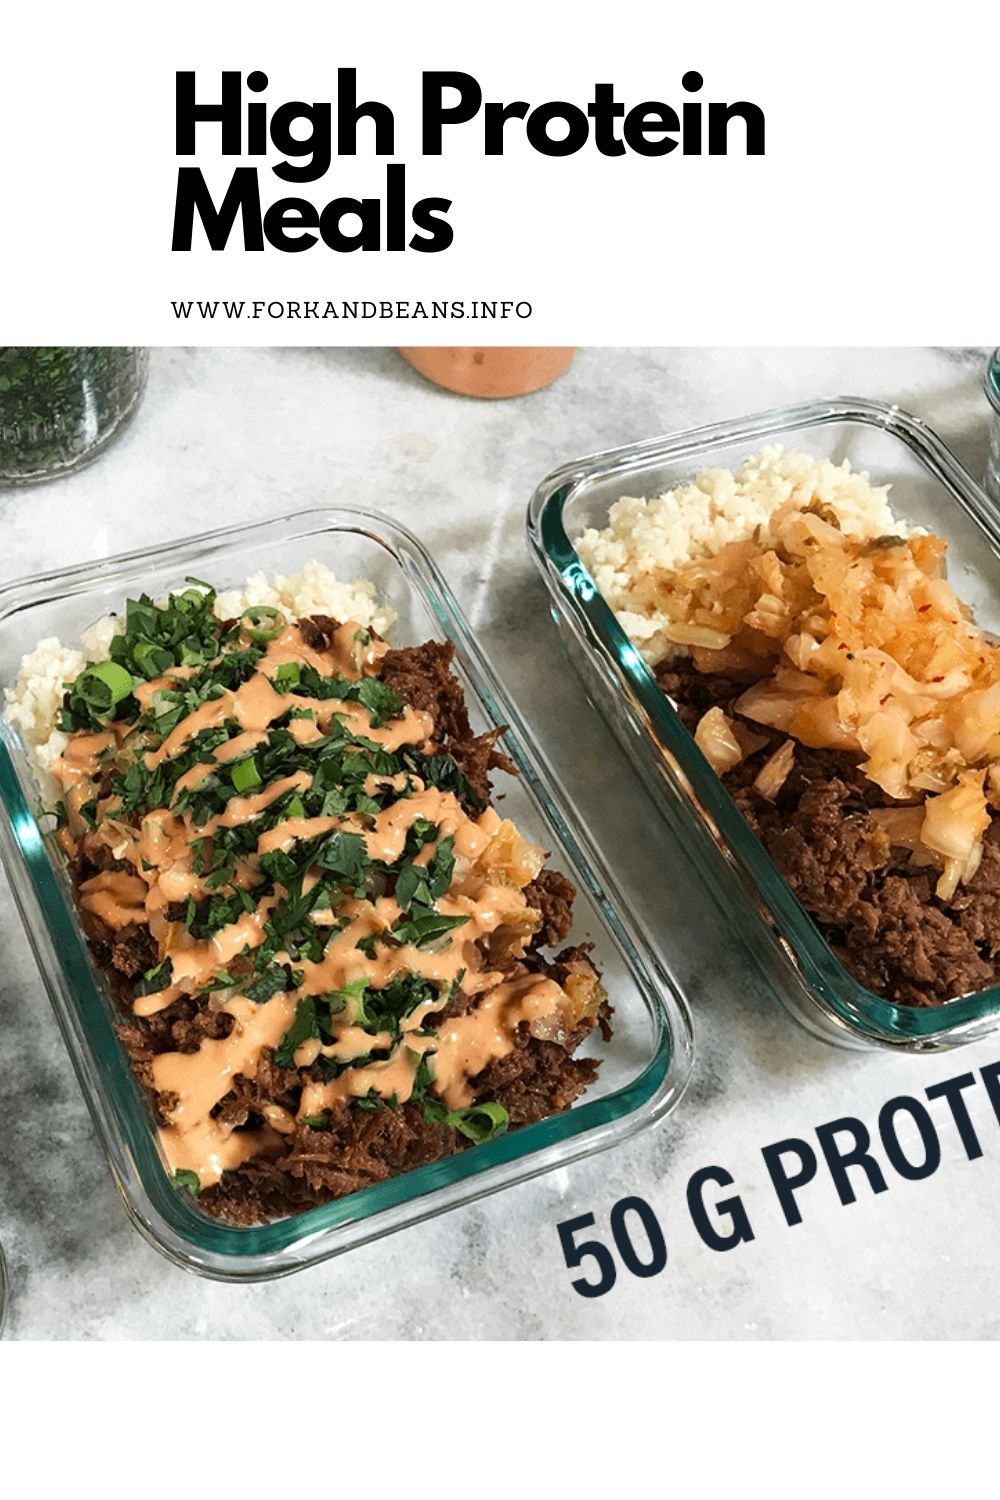 High Protein and Low Carb Keto Korean Steak Bowls